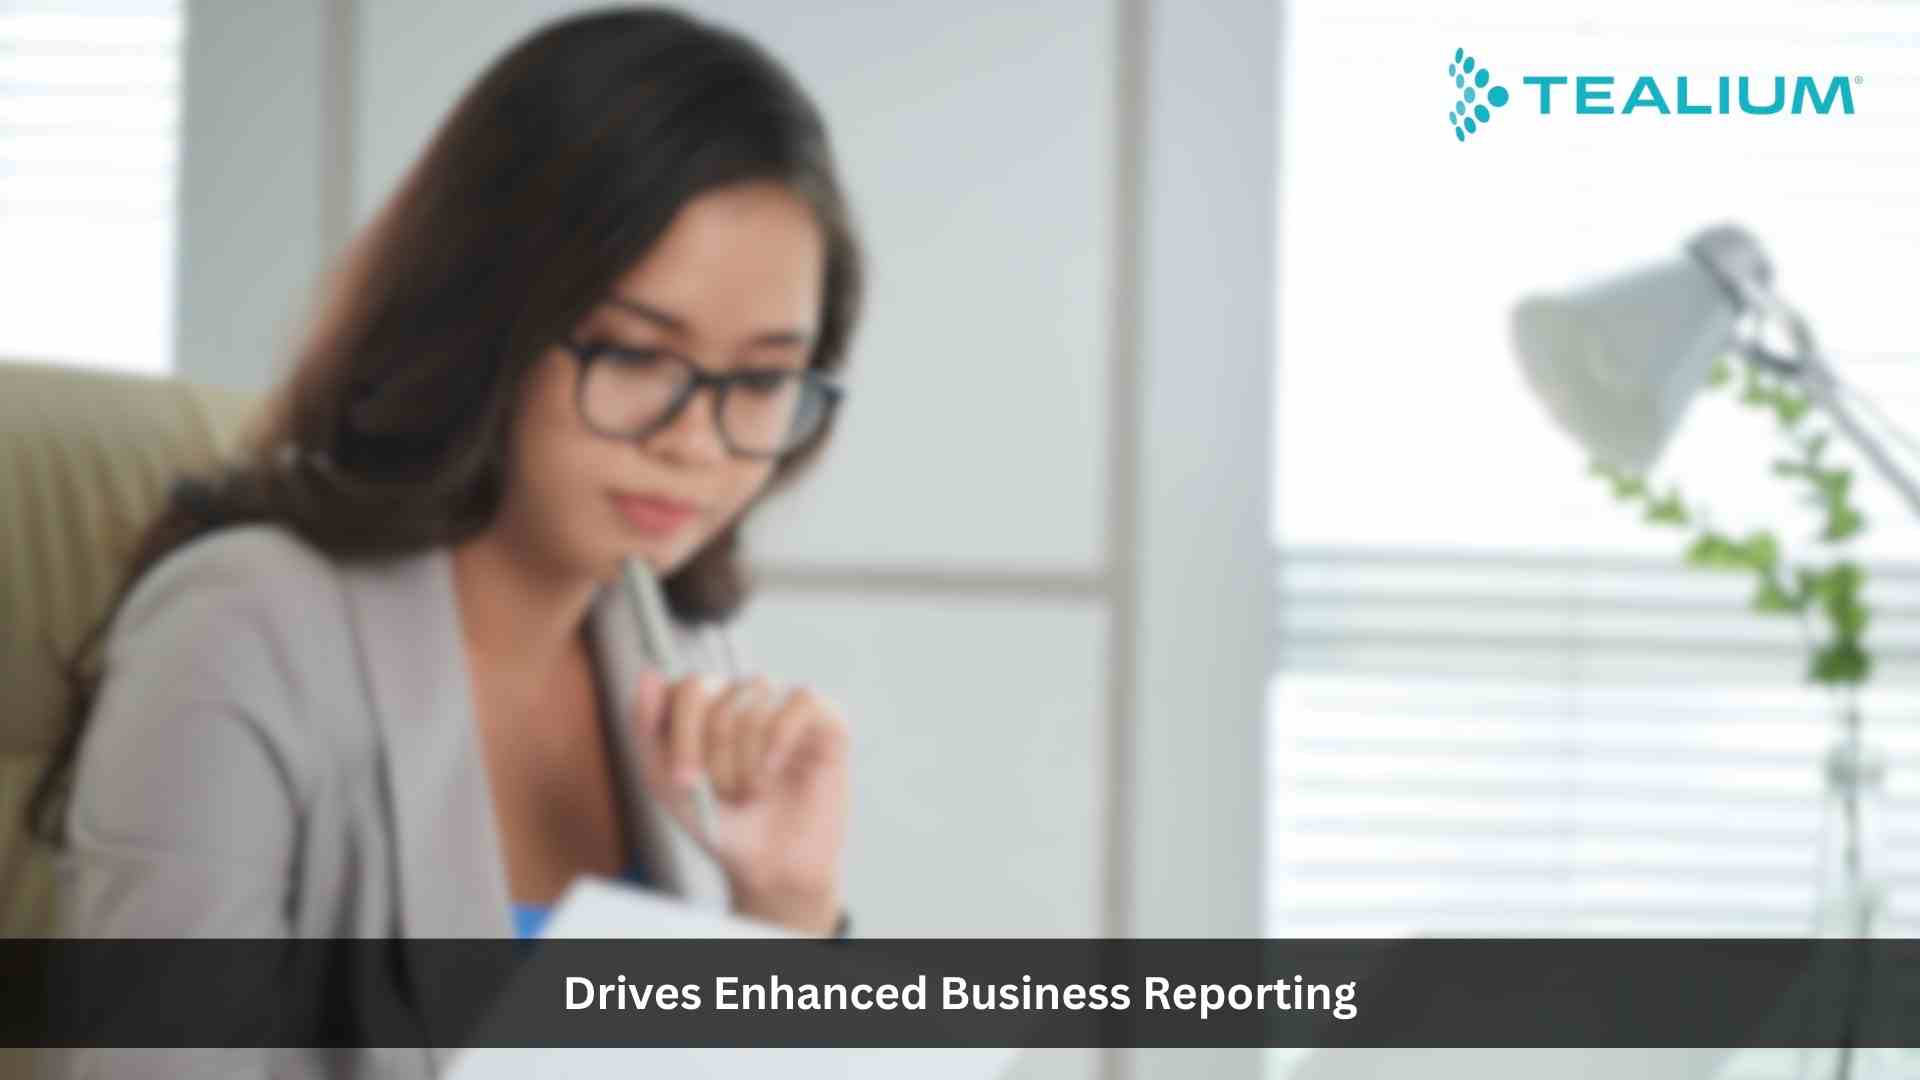 Tealium drives enhanced business reporting for enterprises through its Insights solution